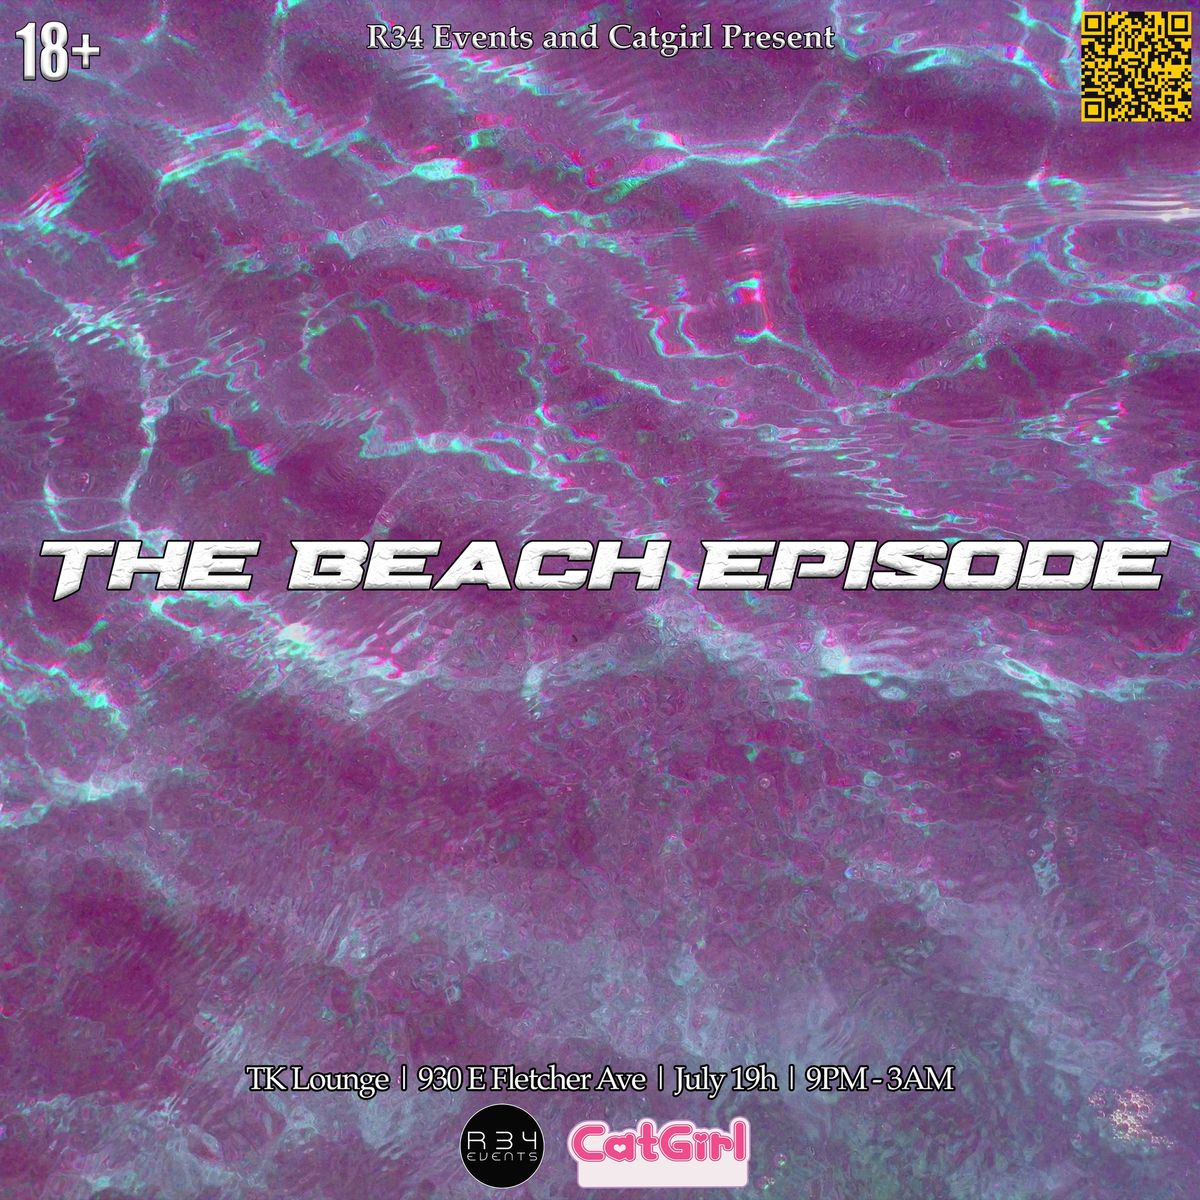 R34 Events and Catgirl Present: The Beach Episode